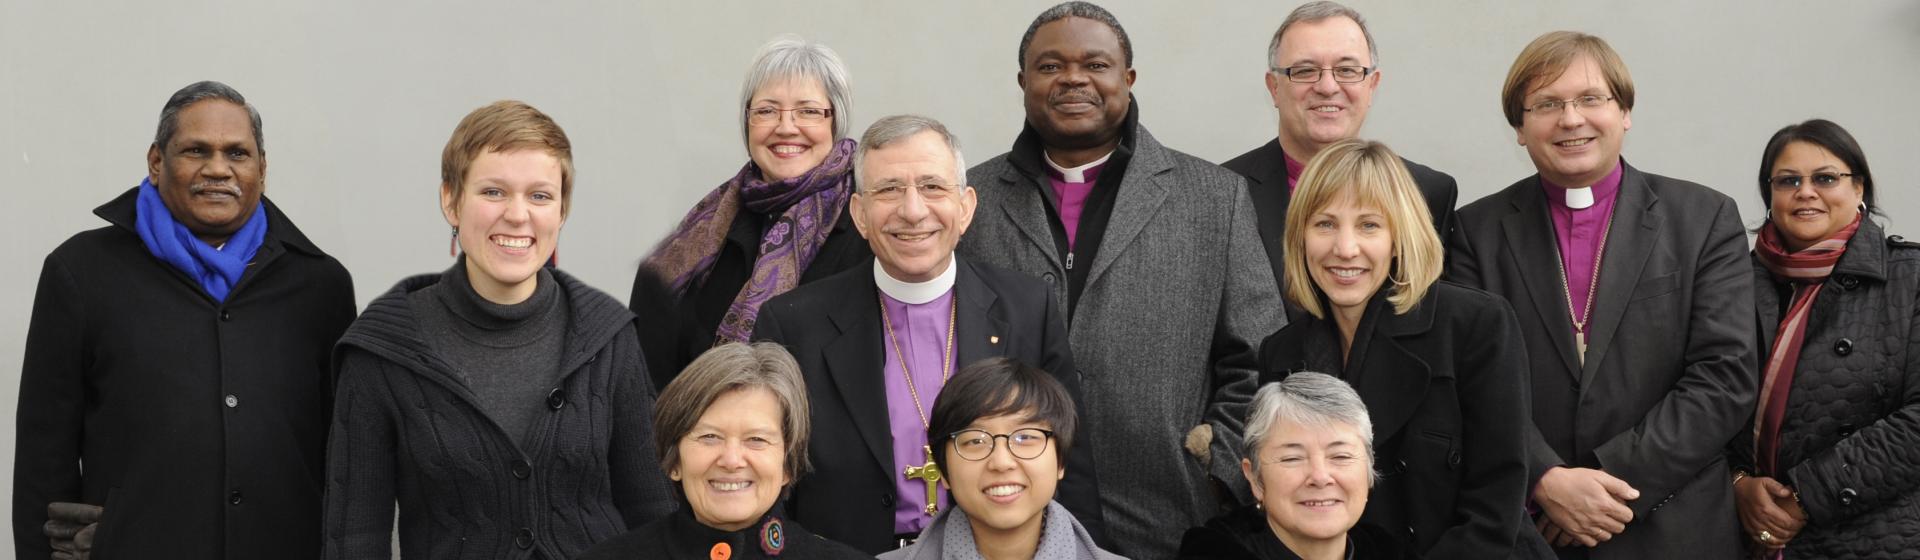 The officers of the Lutheran World Federation.  Photo: LWF/S. Galley